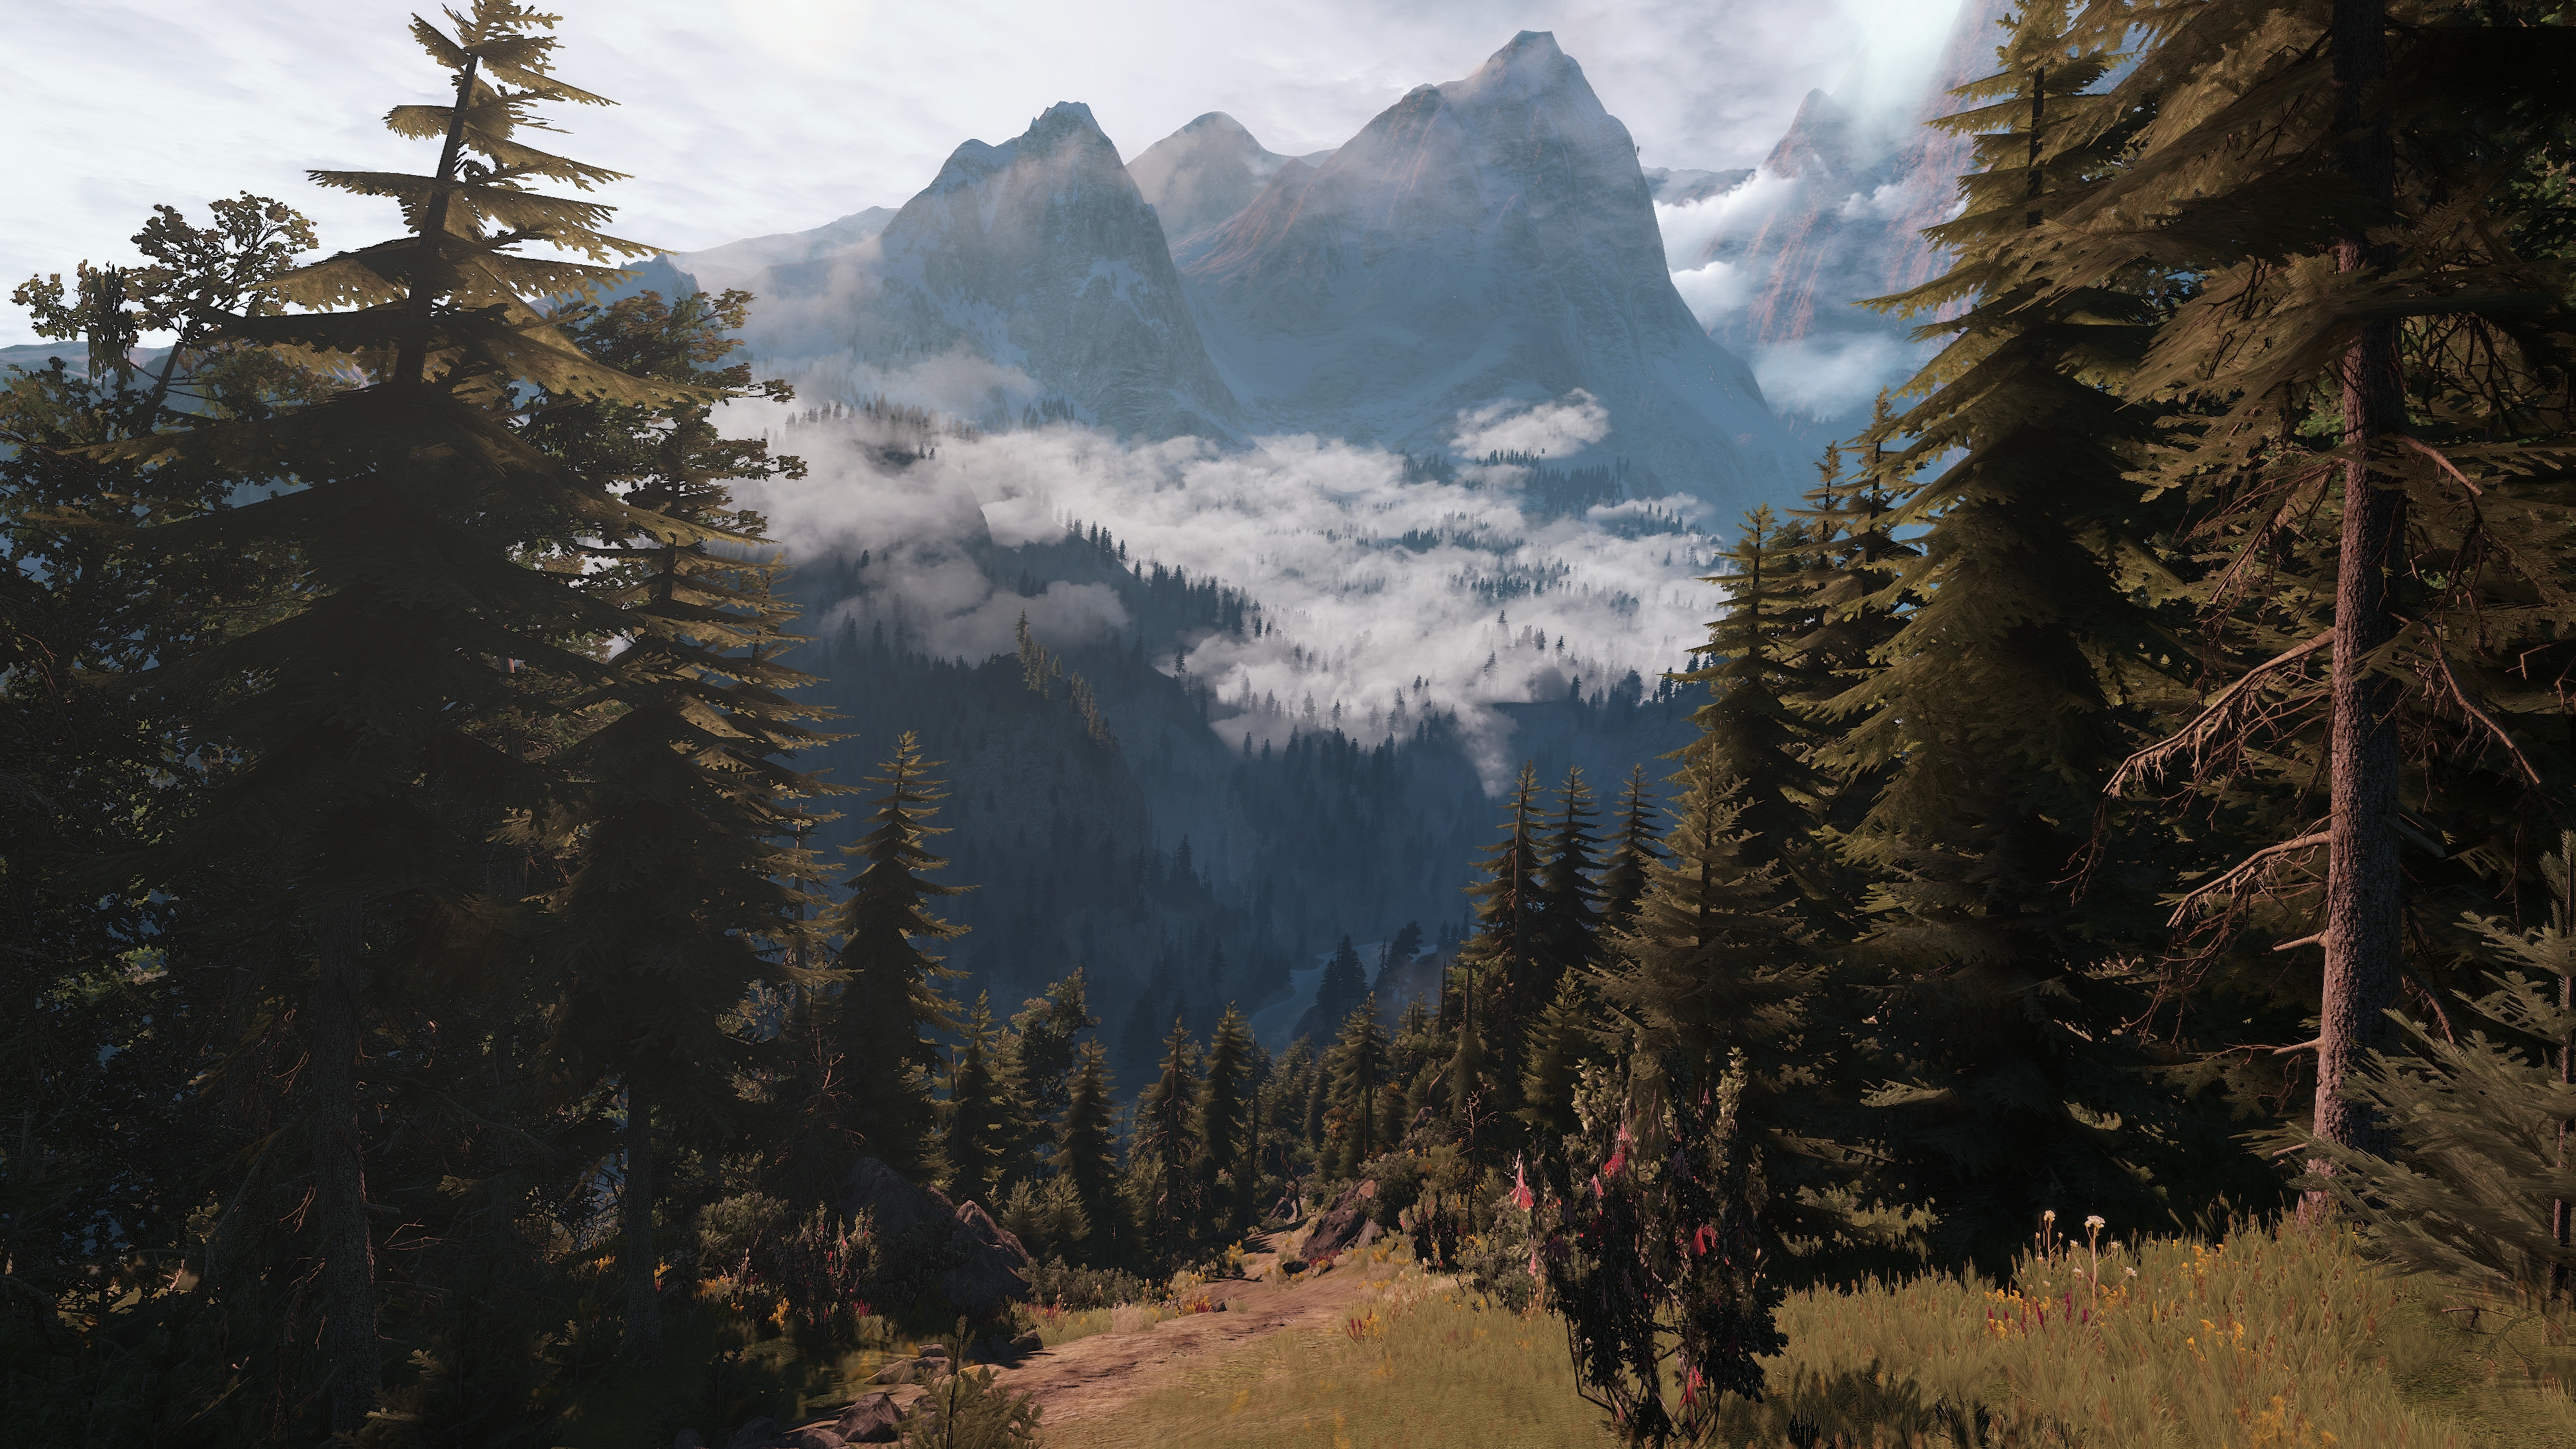 General 3840x2160 The Witcher 3: Wild Hunt screen shot PC gaming mountains Kaer Morhen video game art trees video games sunlight forest mist CGI nature